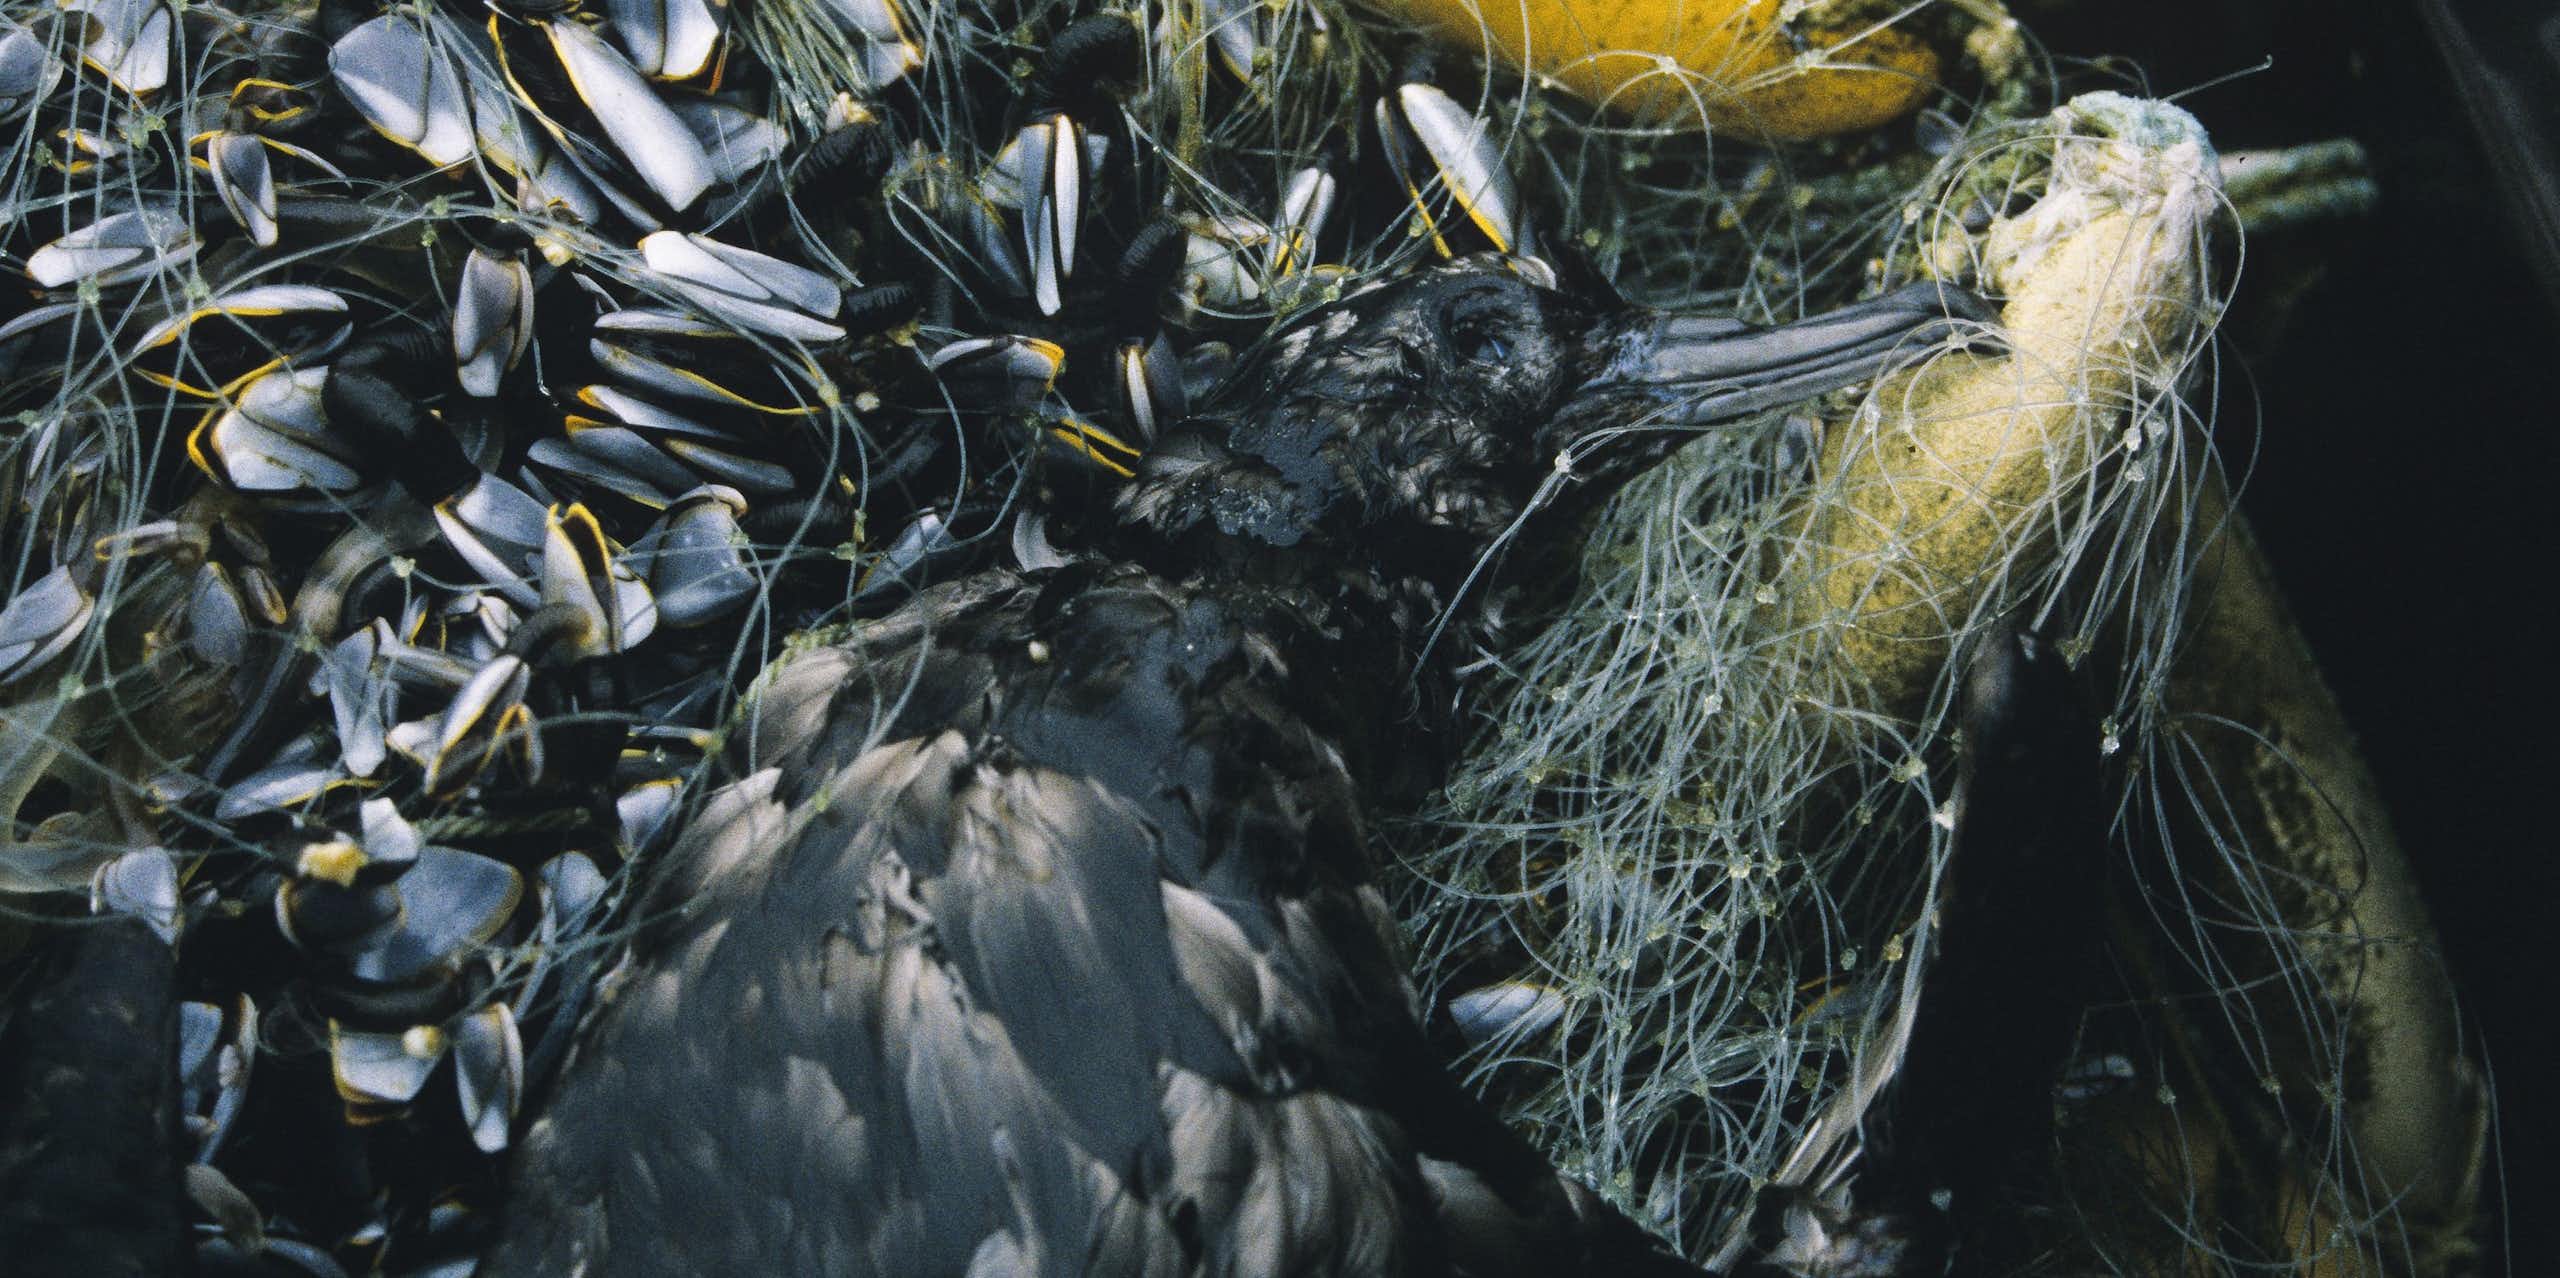 A large black bird, dead, tangled in a net with many fish